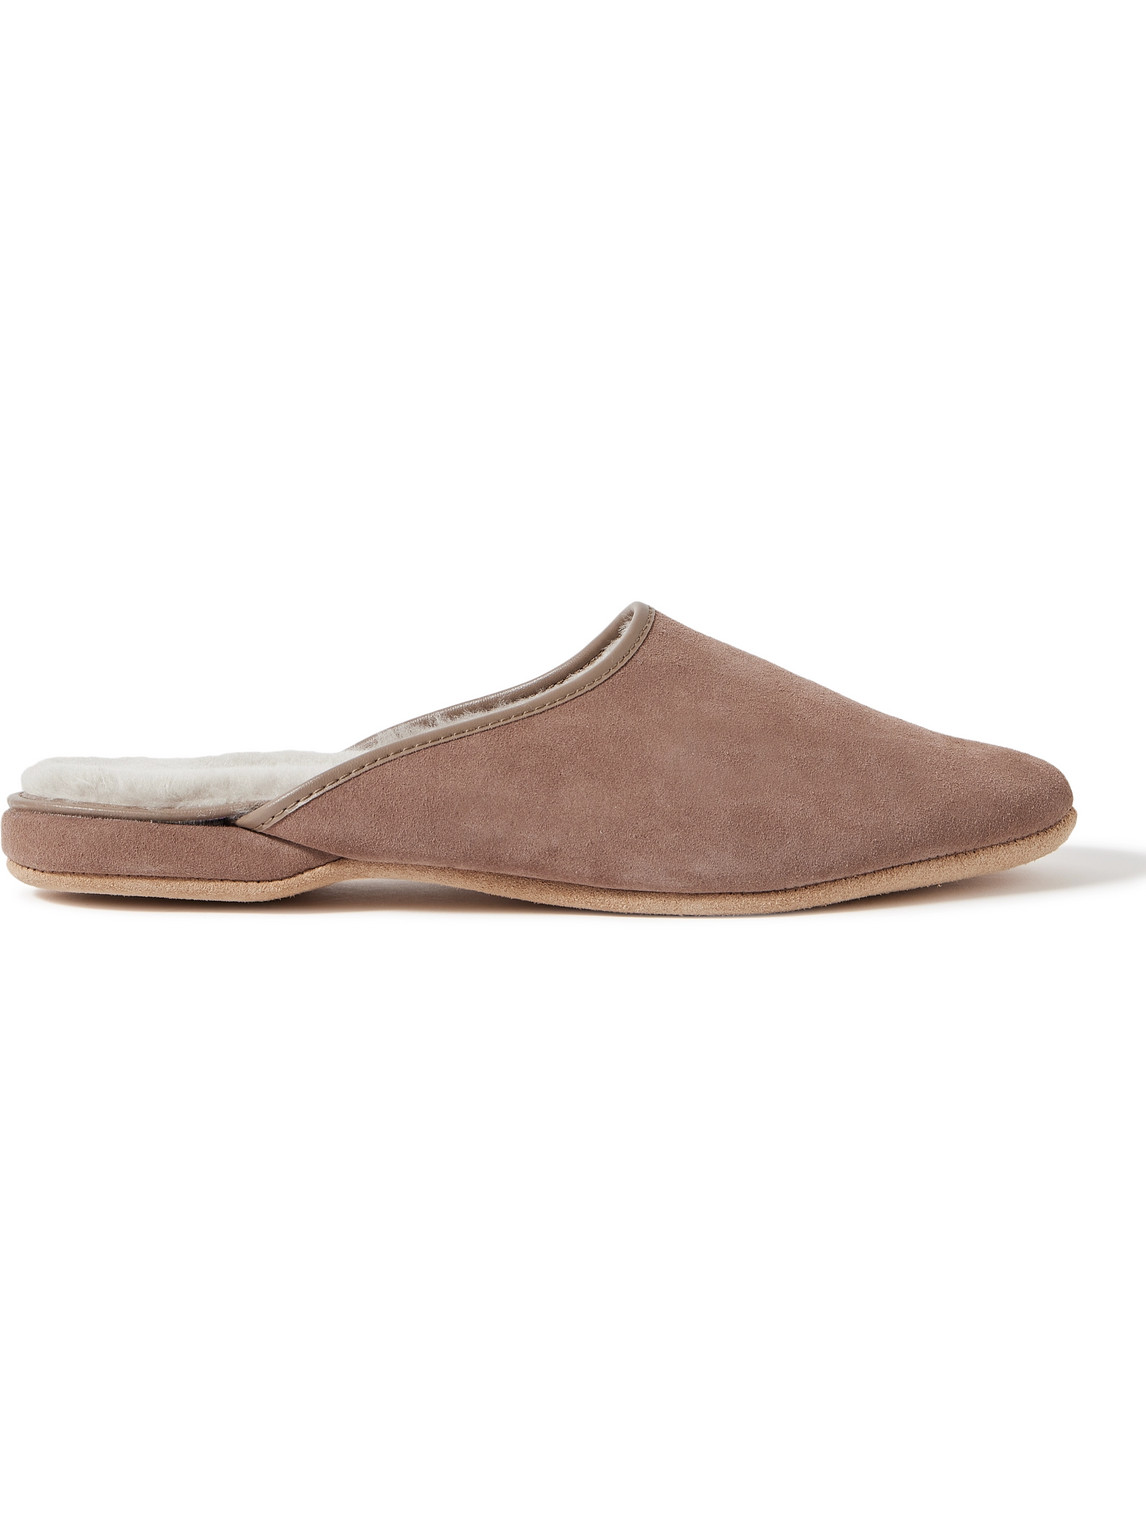 Douglas Shearling-Lined Suede Slippers